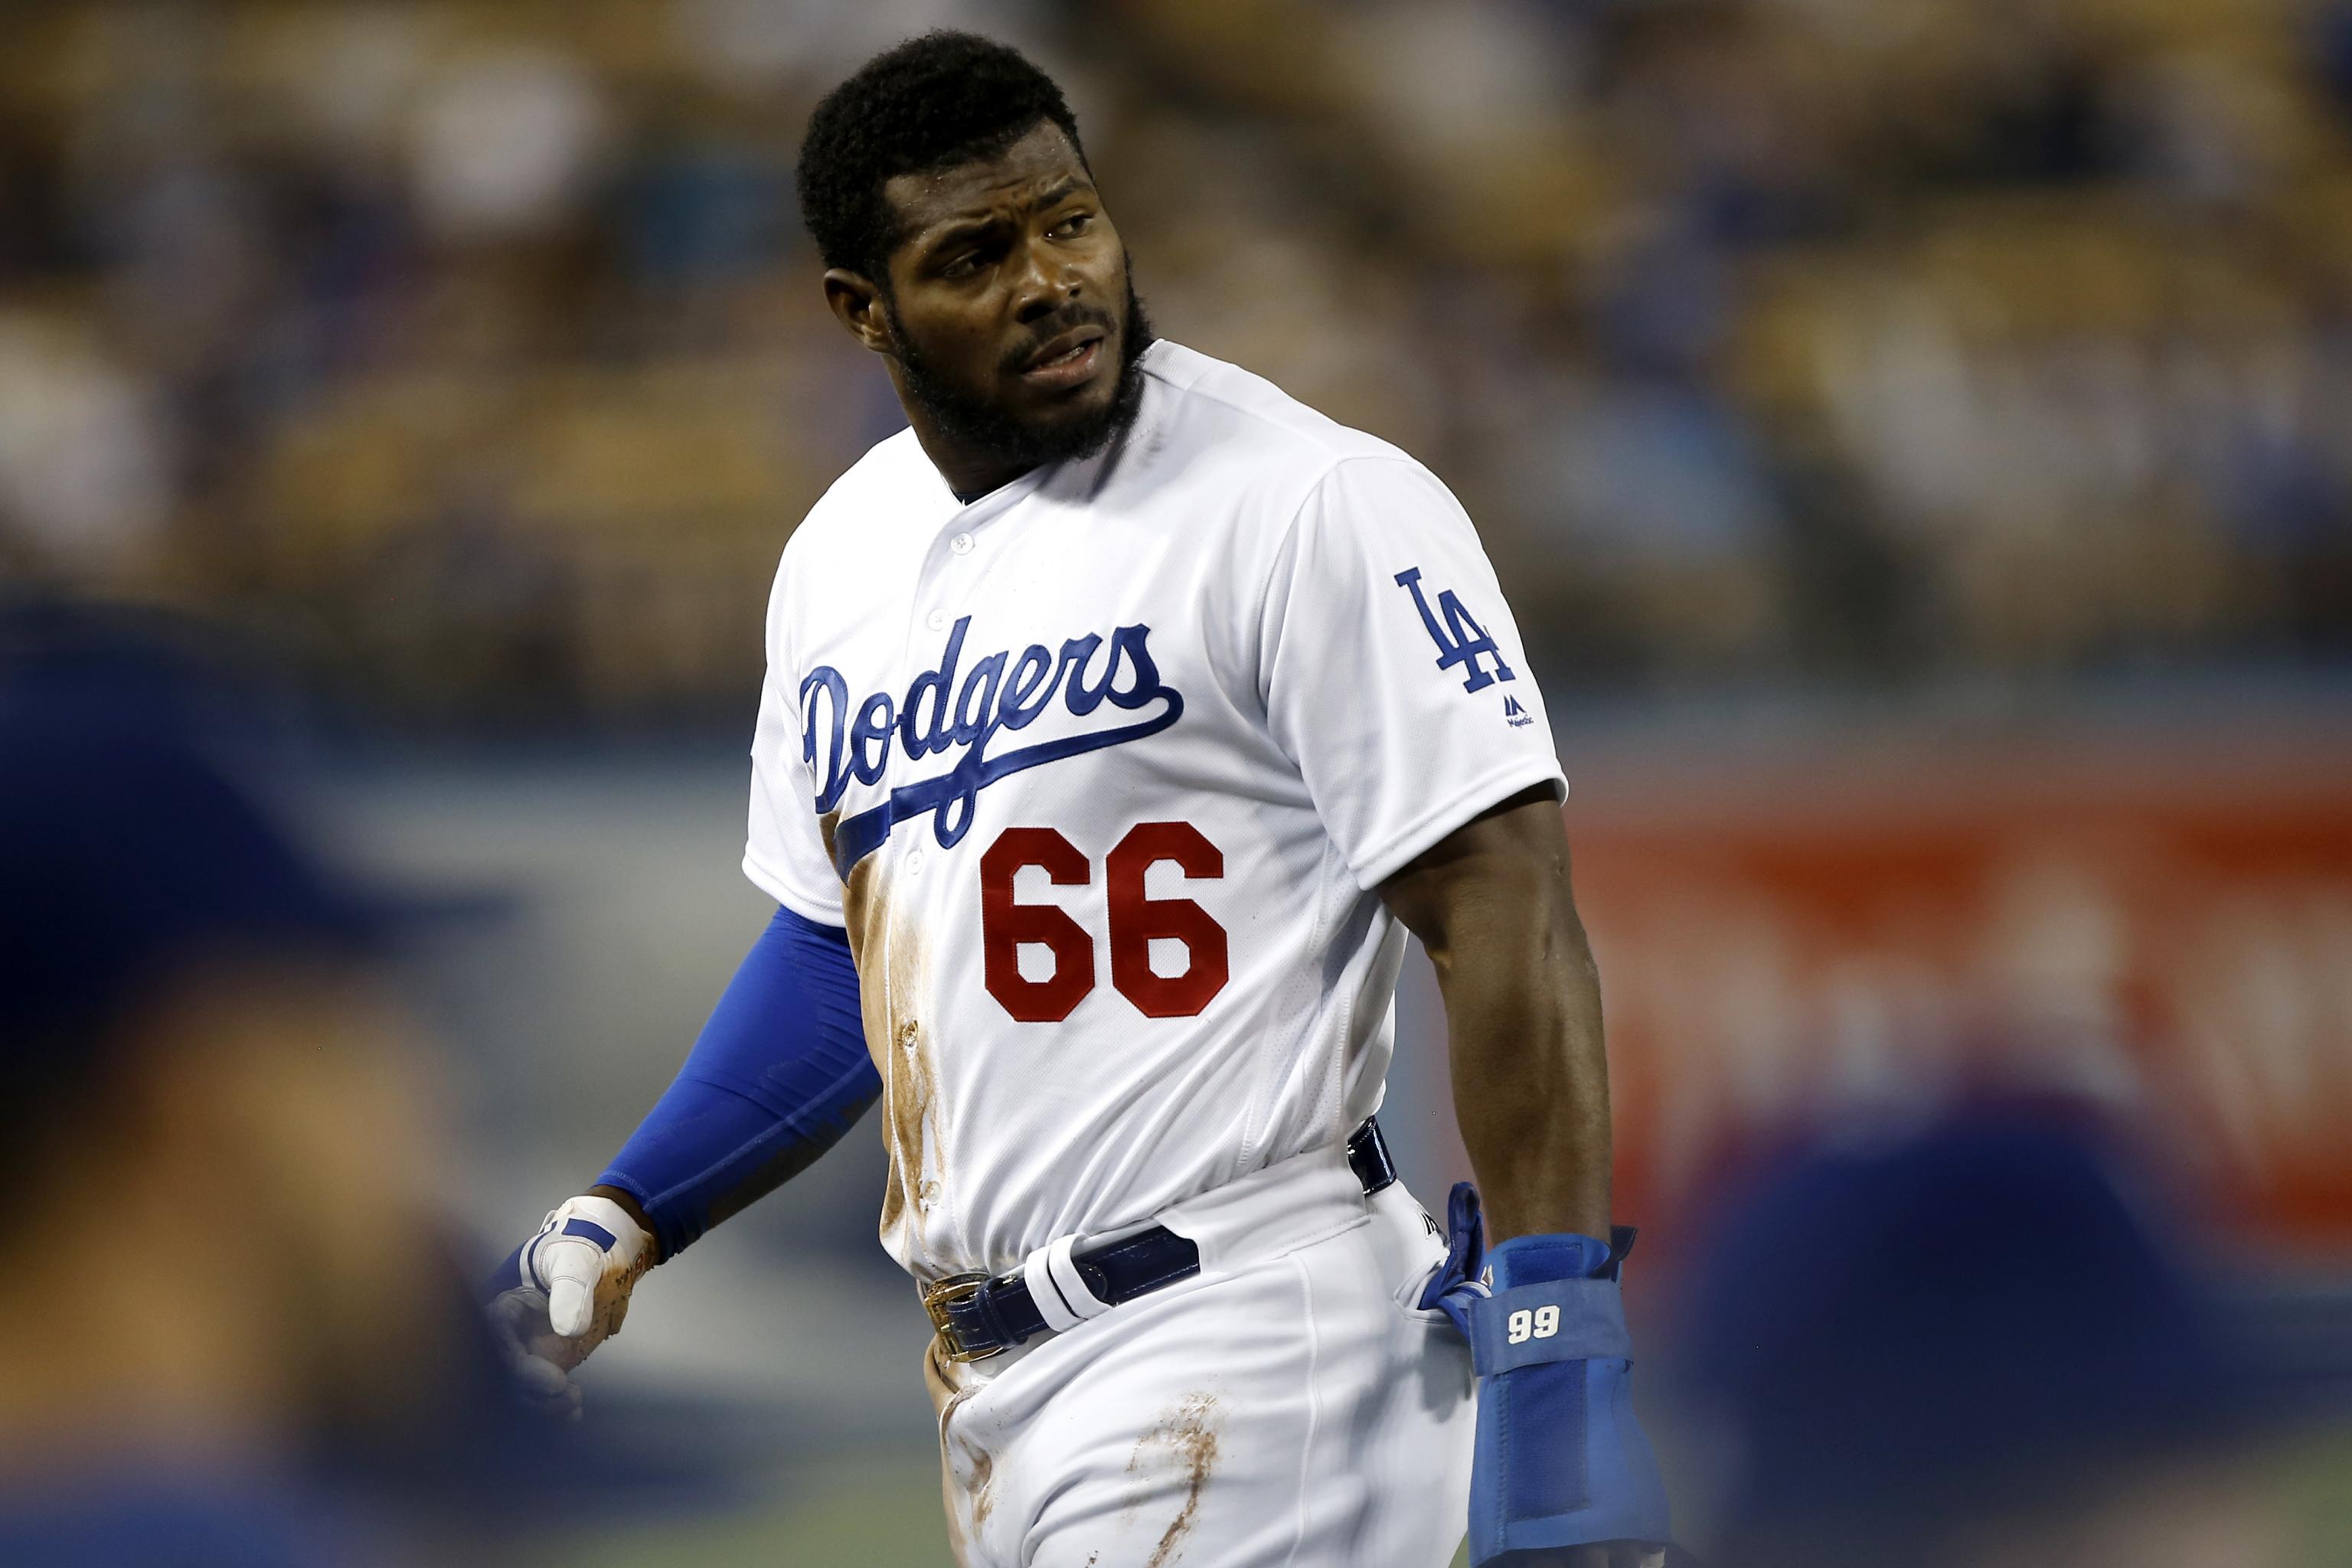 Yasiel Puig Goes On Gucci Shopping Spree After Multiple Burglaries